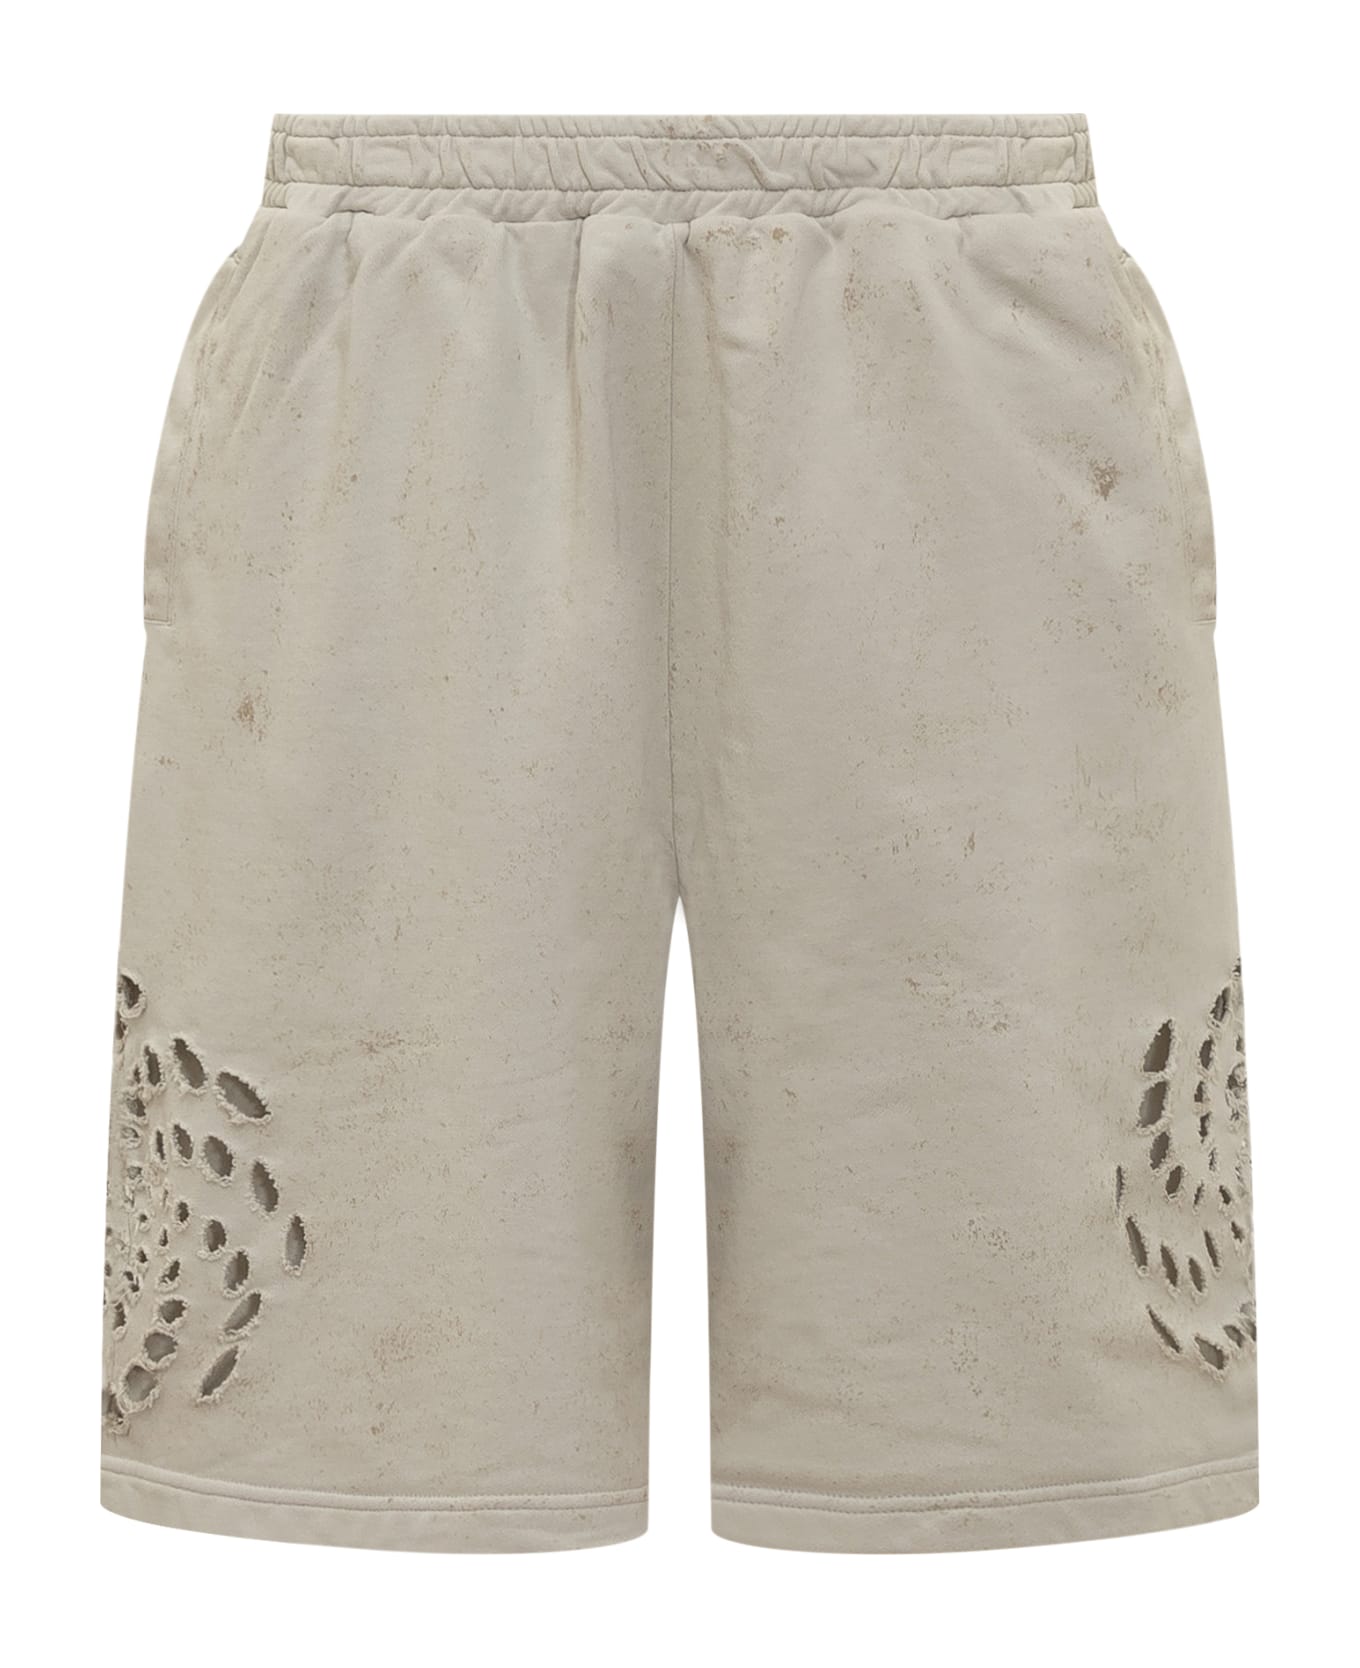 44 Label Group Shorts With Vortex Pattern - DIRTY WHITE-GYPS ショートパンツ